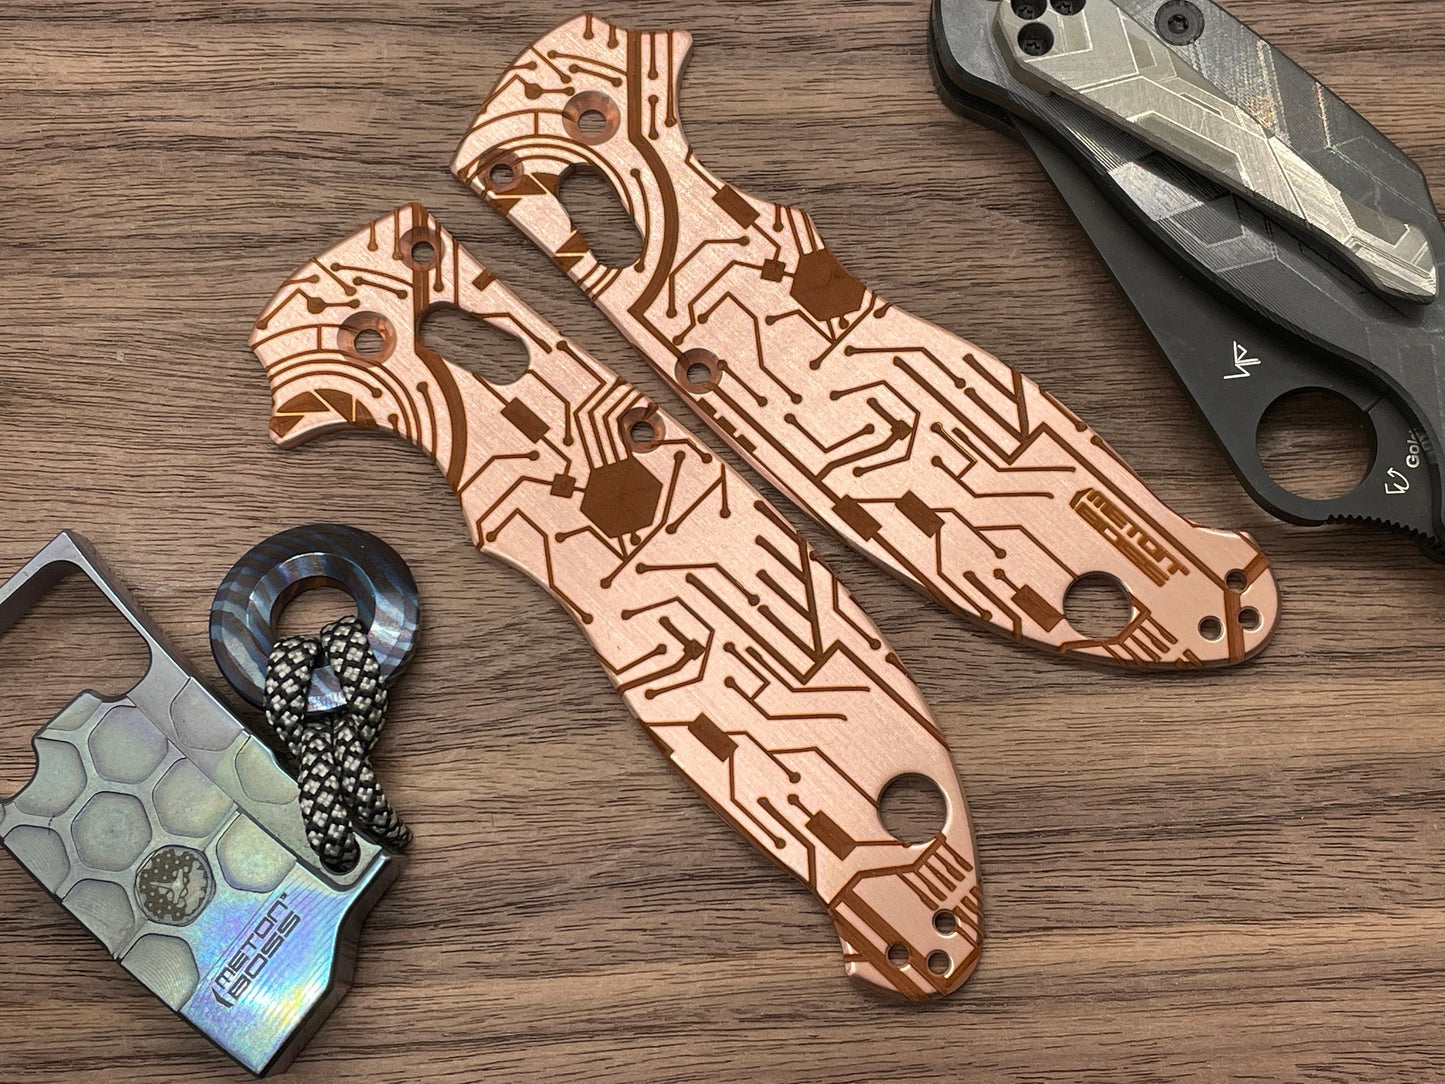 CIRCUIT Board engraved Copper scales for Spyderco MANIX 2